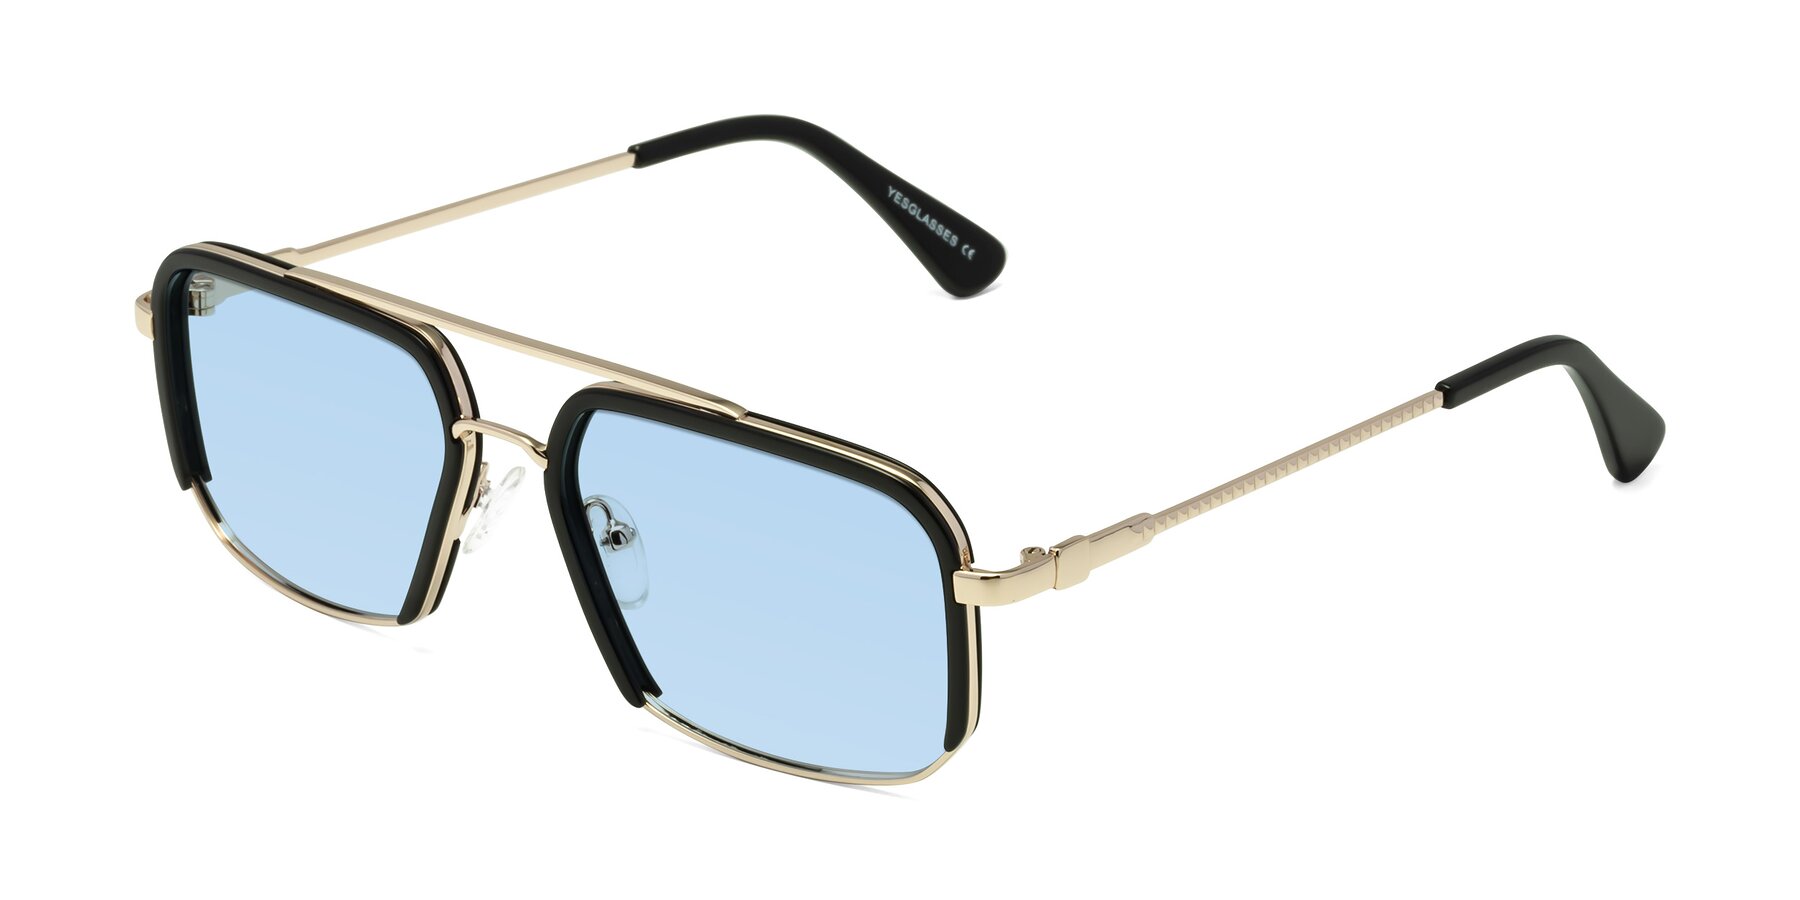 Angle of Dechter in Black-Gold with Light Blue Tinted Lenses